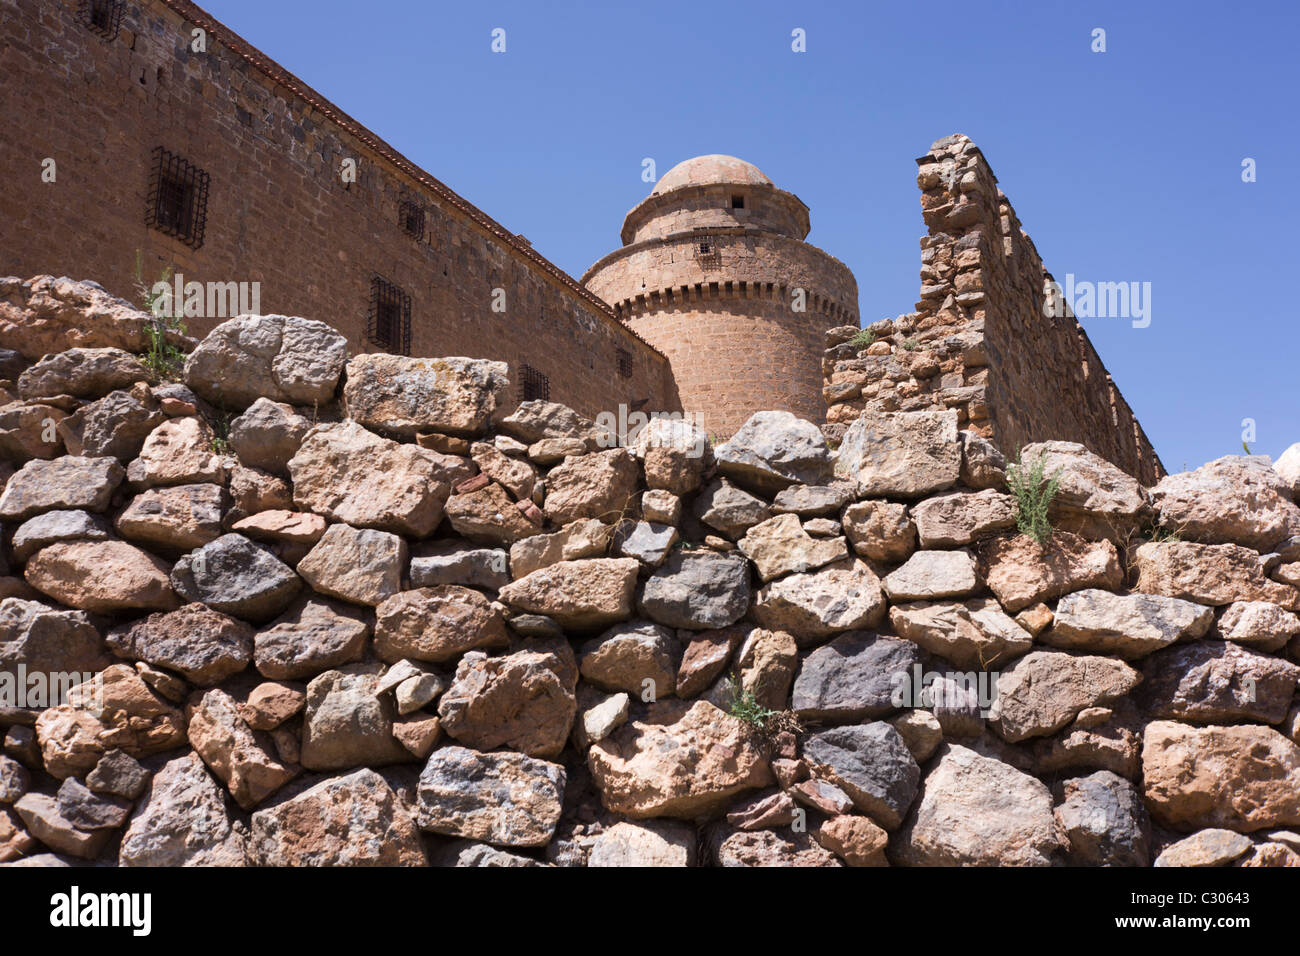 Stones and fortifications of the medieval La Calahorra Castle. Stock Photo